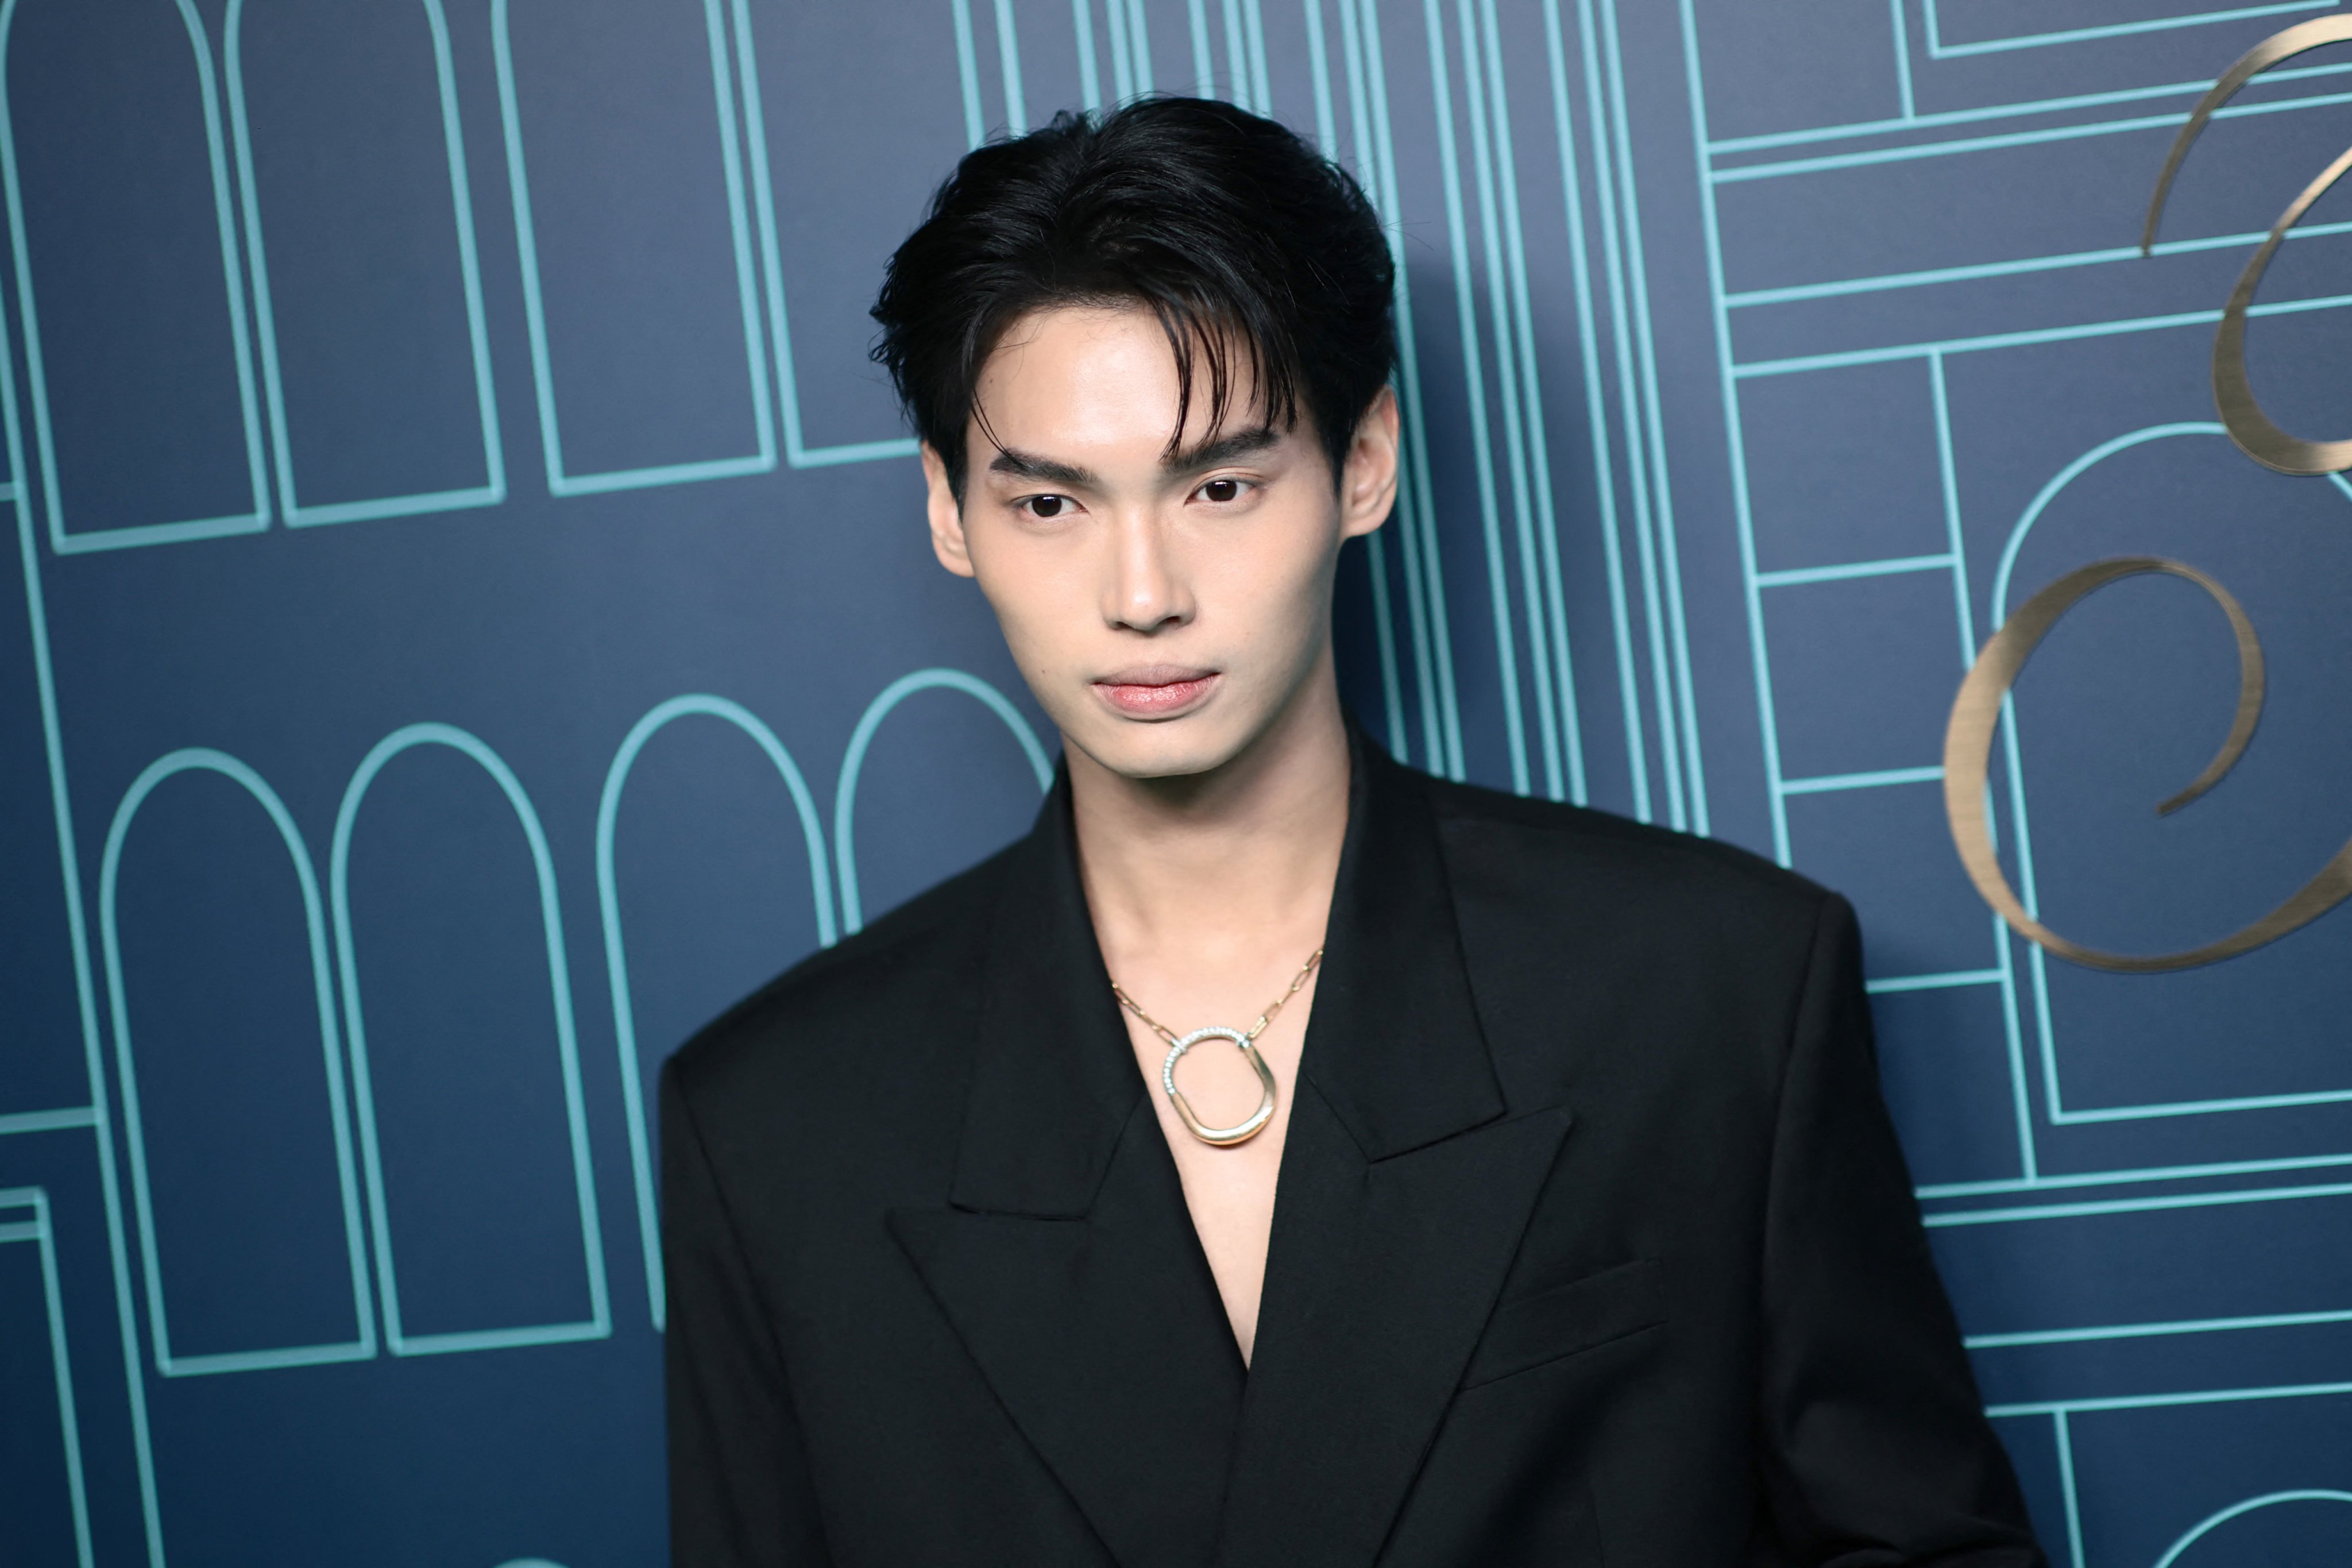 Thai star Metawin Opas-iamkajorn at a Tiffany & Co event in New york on April 27, 2023. Photo: Getty Images via AFP 